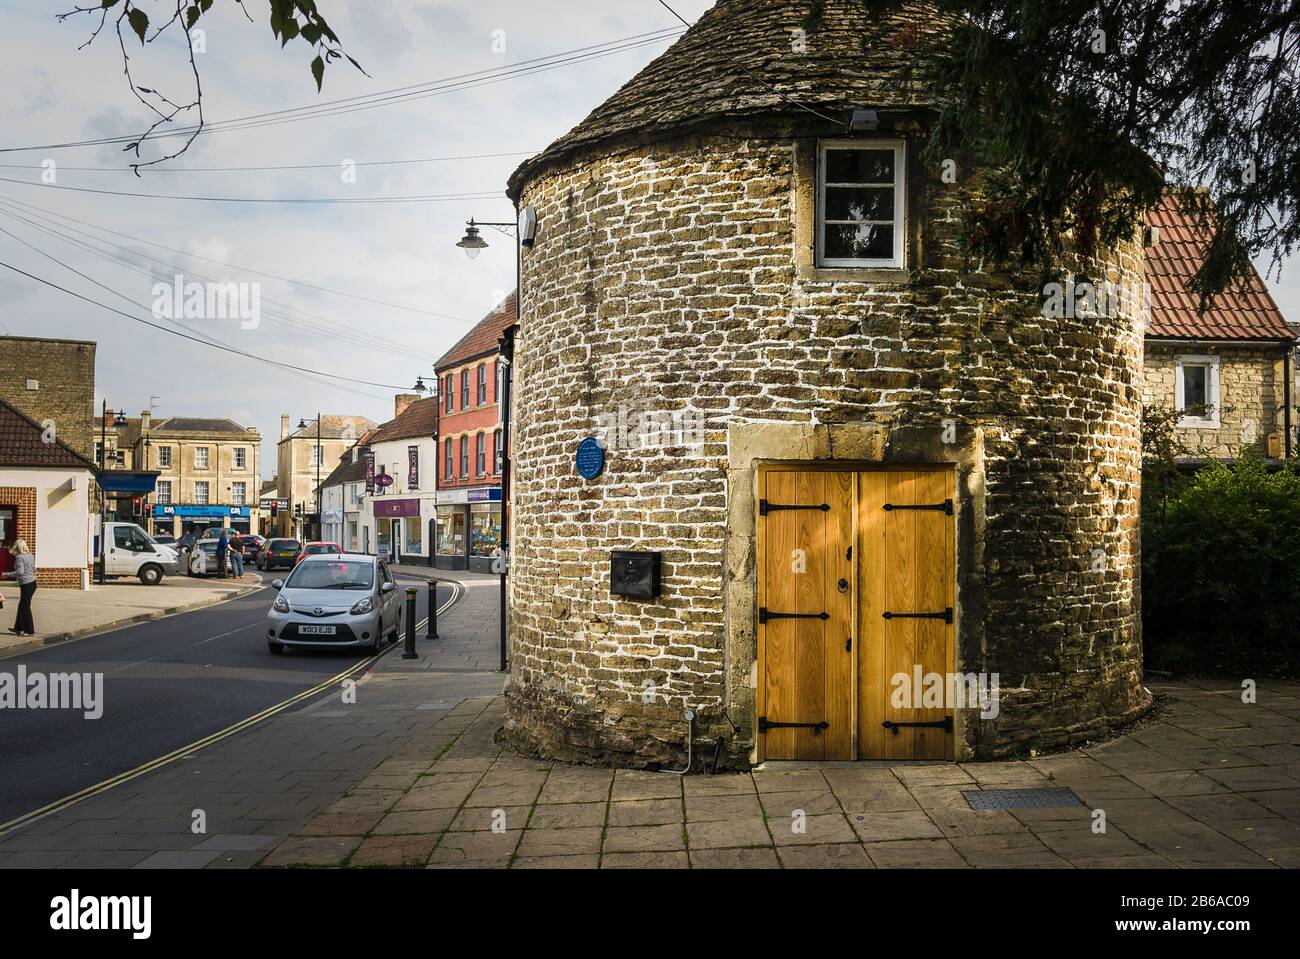 The old Round House in the centre of Melksham Wiltshire England UK. It has been used variously as a wool drying amenity; an armoury and now a Tourism Stock Photo